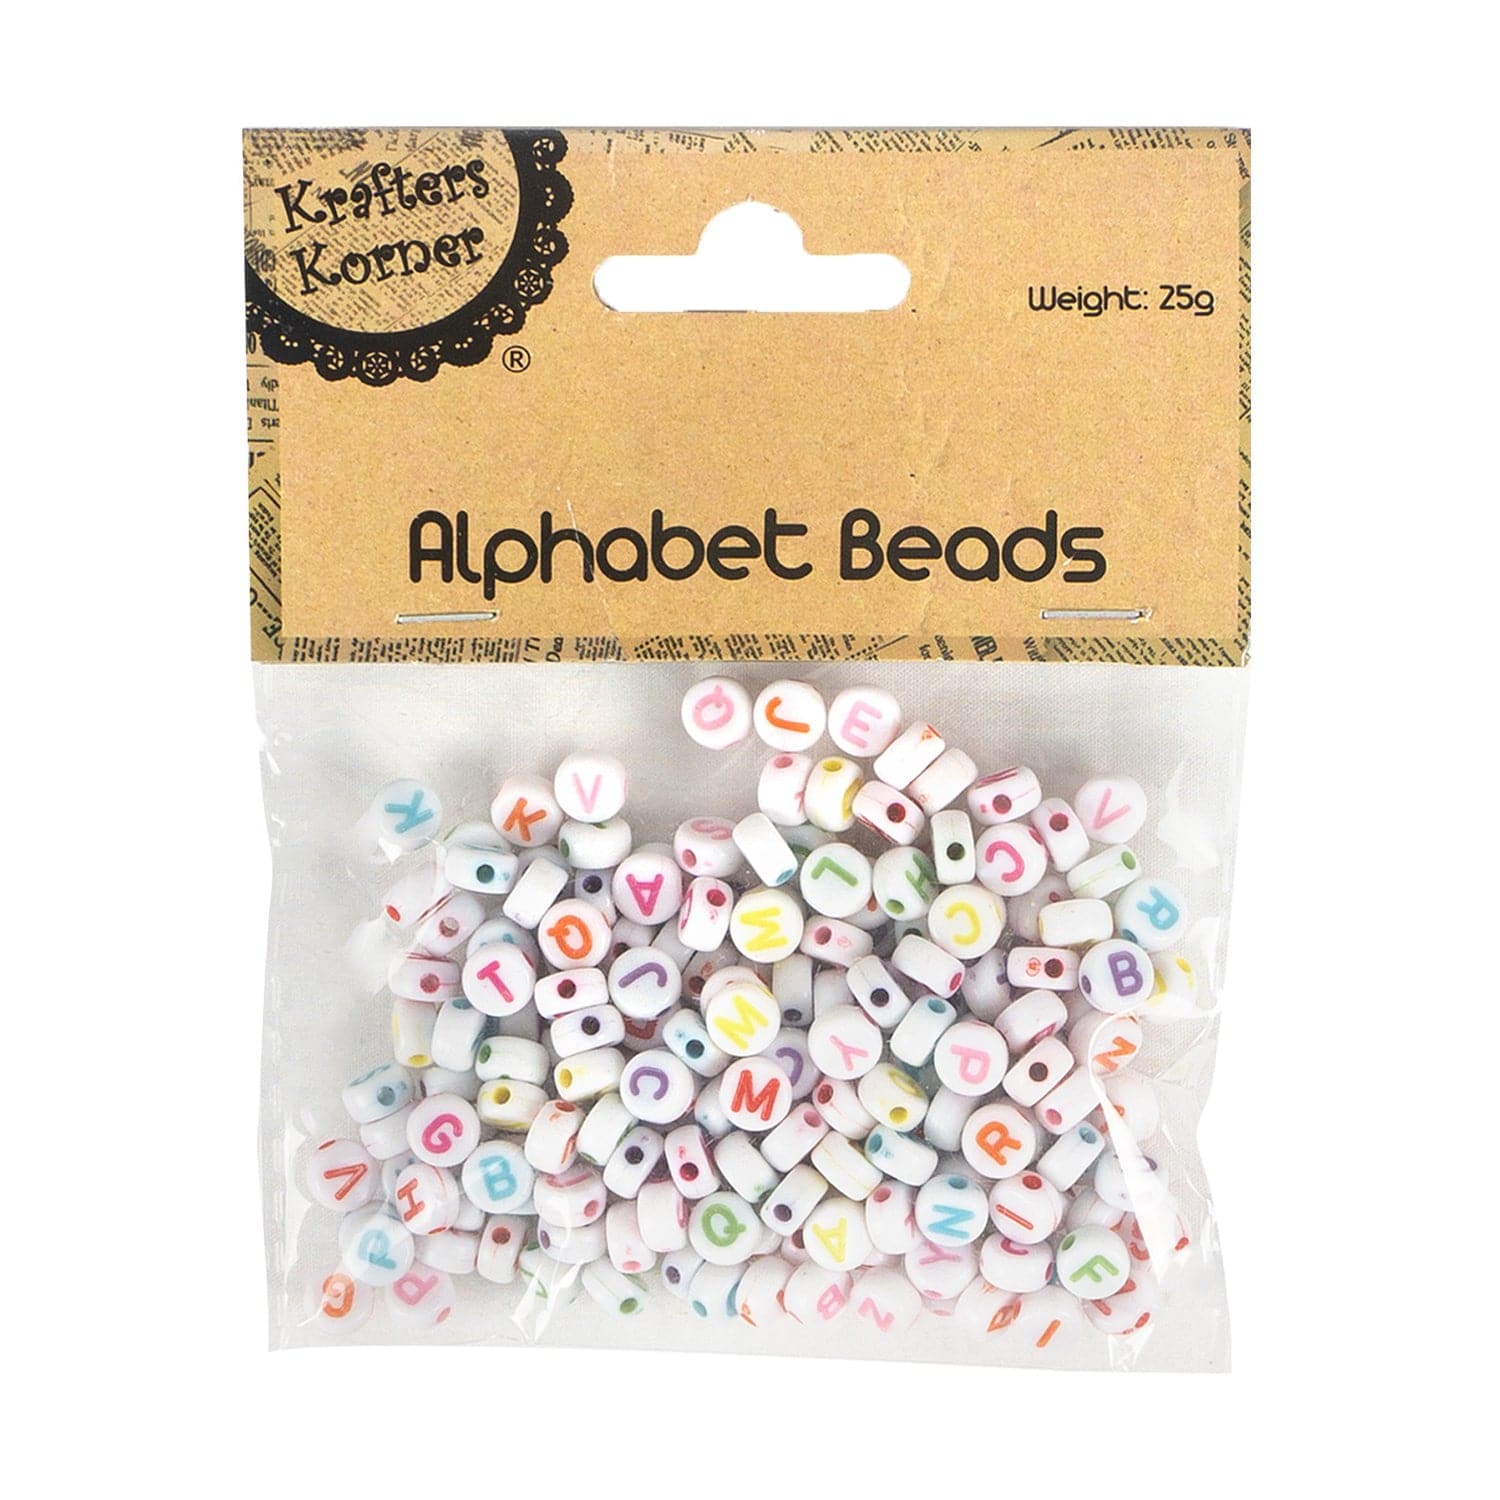 The Best Selection for Krafters Korner Alphabet Beads With Letters 25g Jem